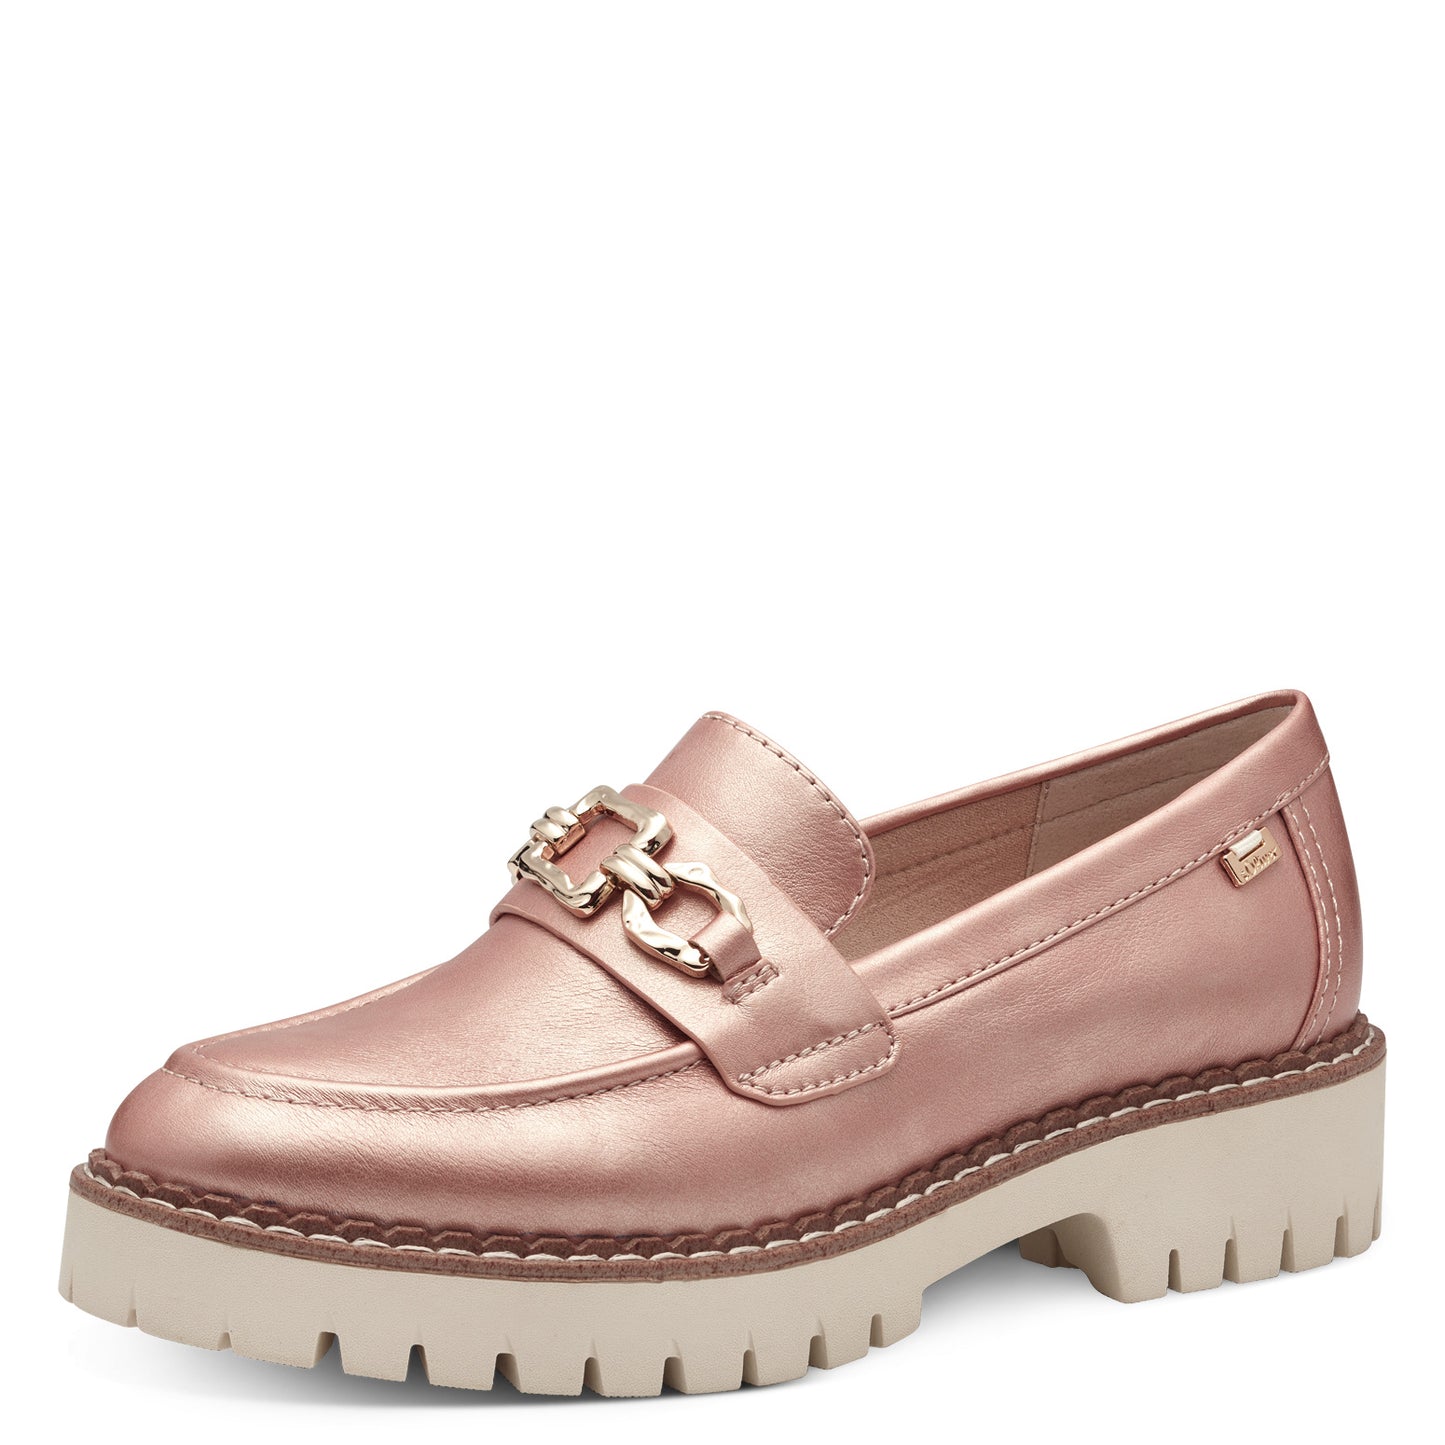 S.oliver - Ladies Shoes Loafers Rose (2009)